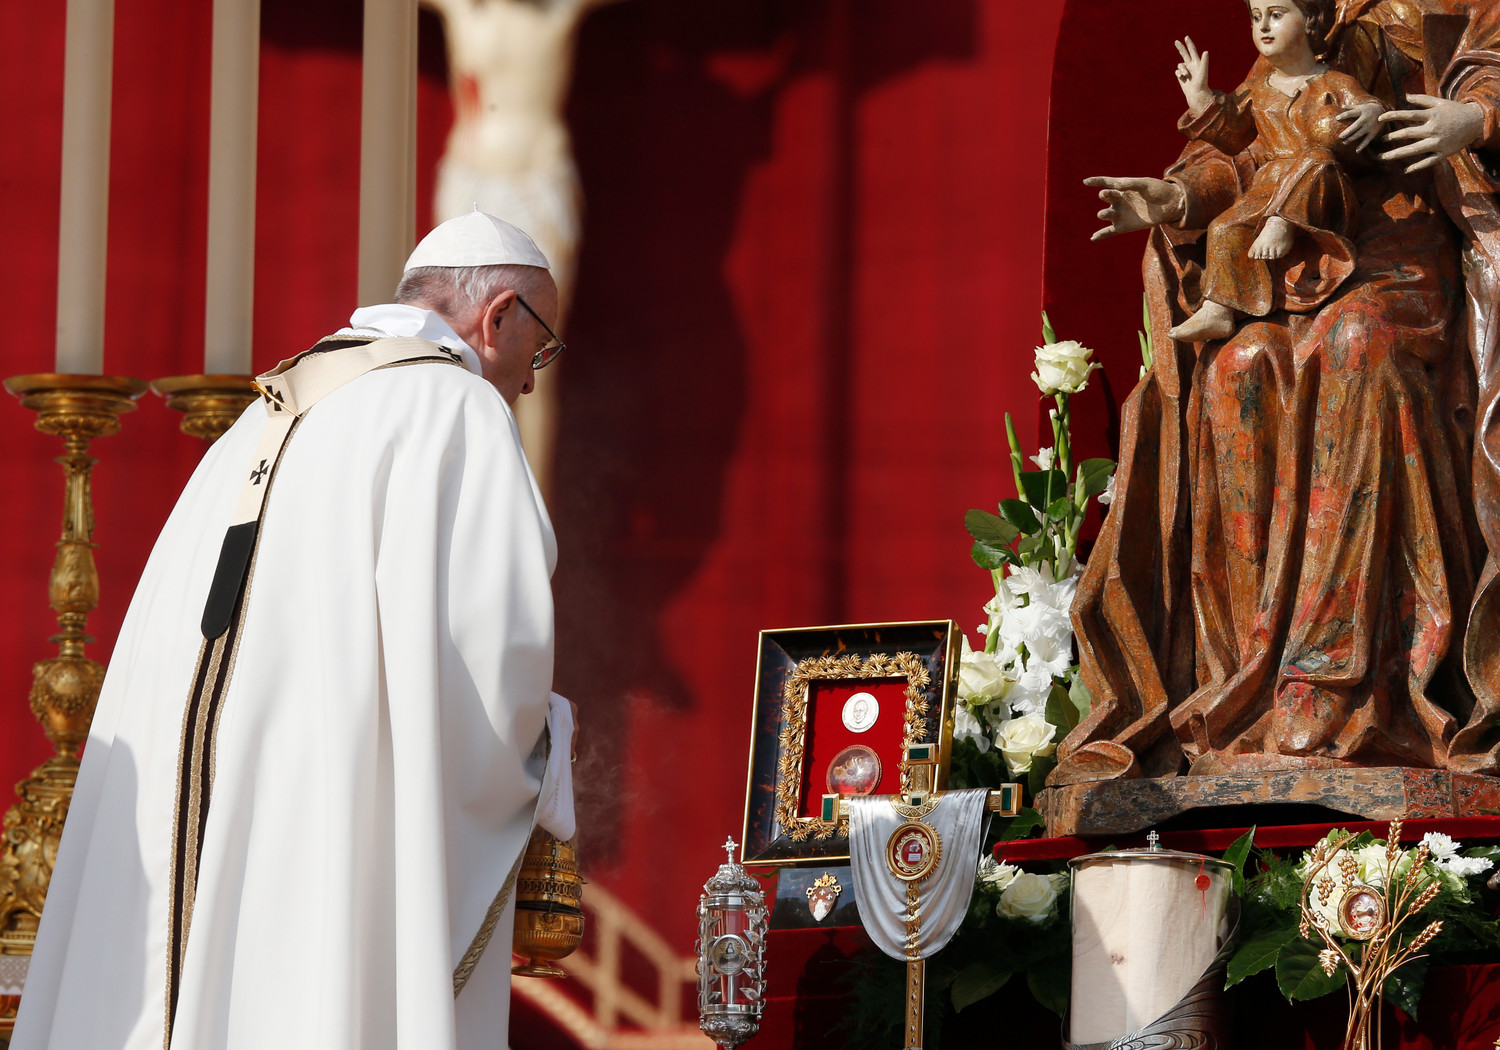 Pope Francis uses incense to venerate relics as he celebrates the canonization Mass for seven new saints in St. Peter’s Square at the Vatican Oct. 14. Among the new saints are St. Paul VI and St. Oscar Romero.